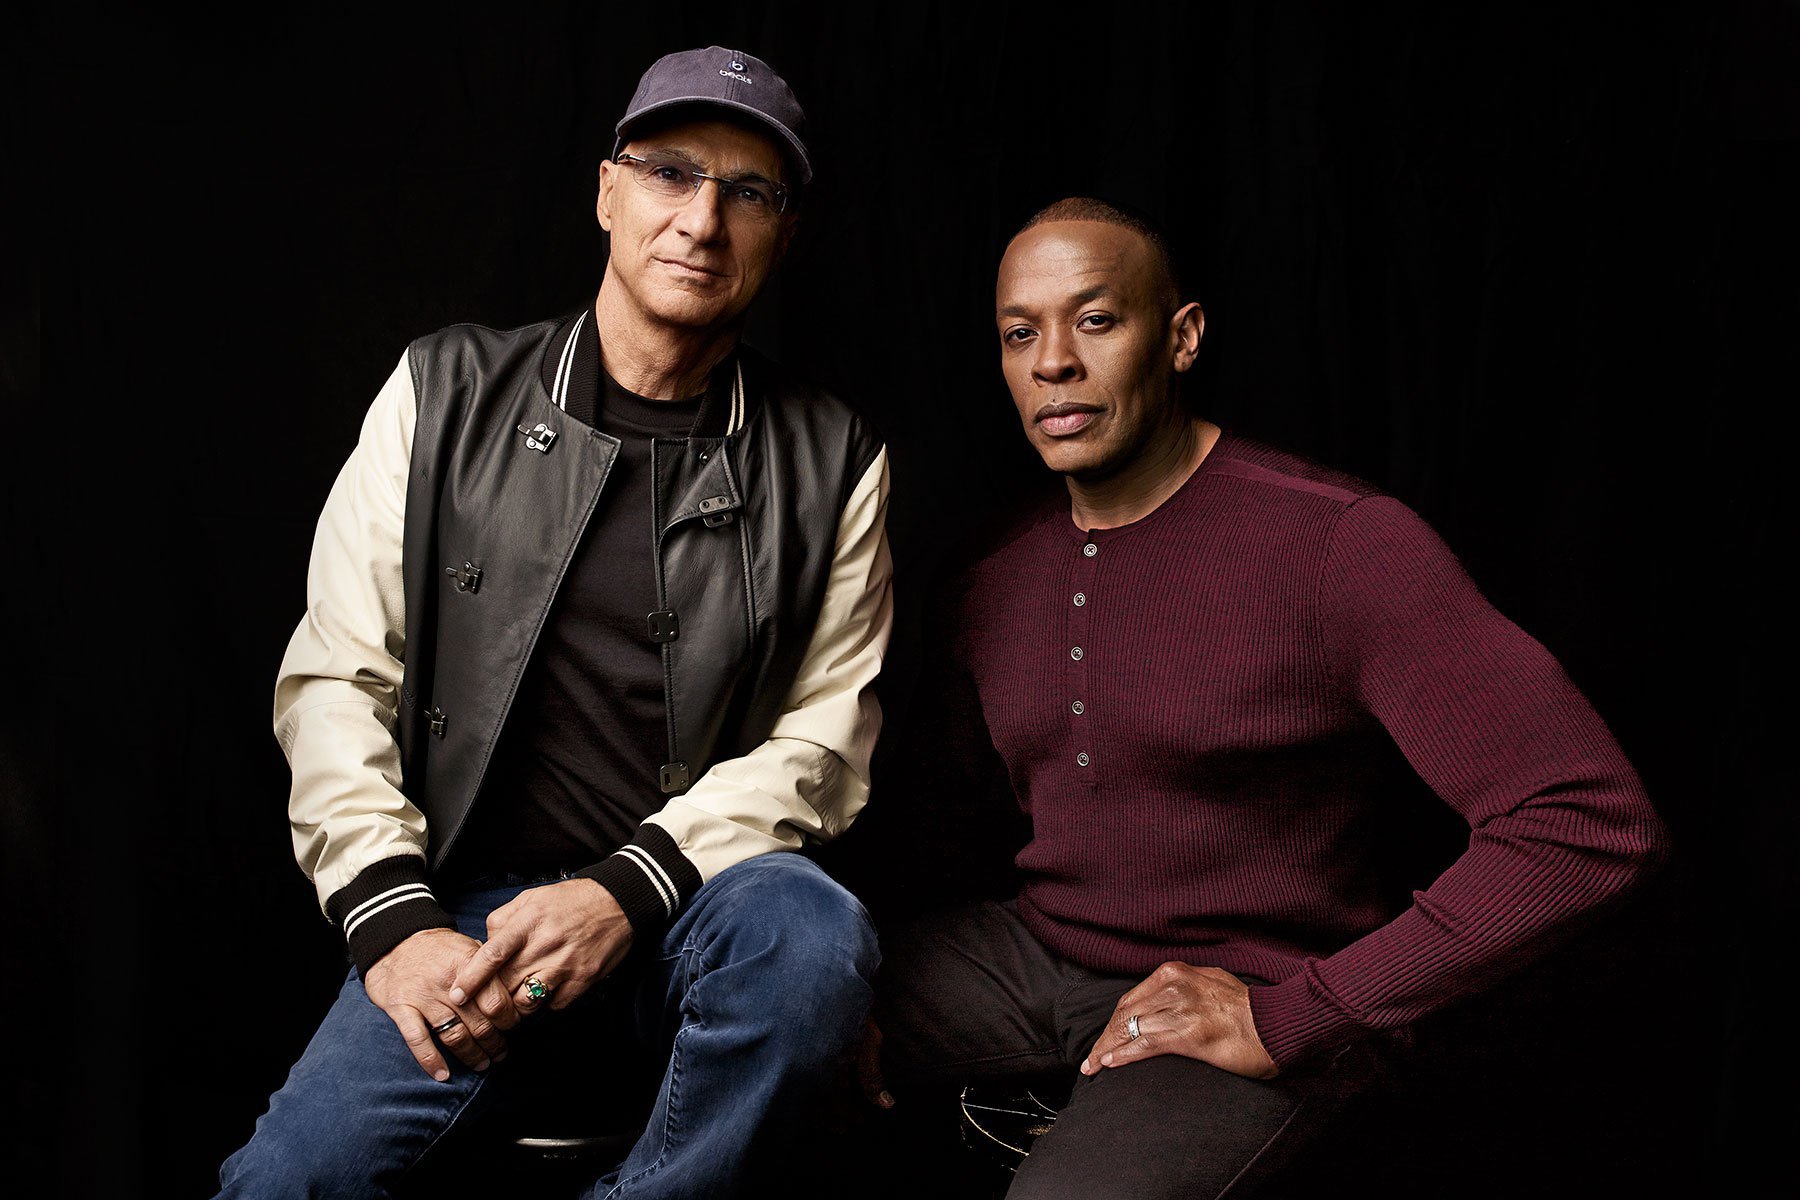 Dr. Dre and Jimmy Iovine are spearheading video streaming in Apple Music